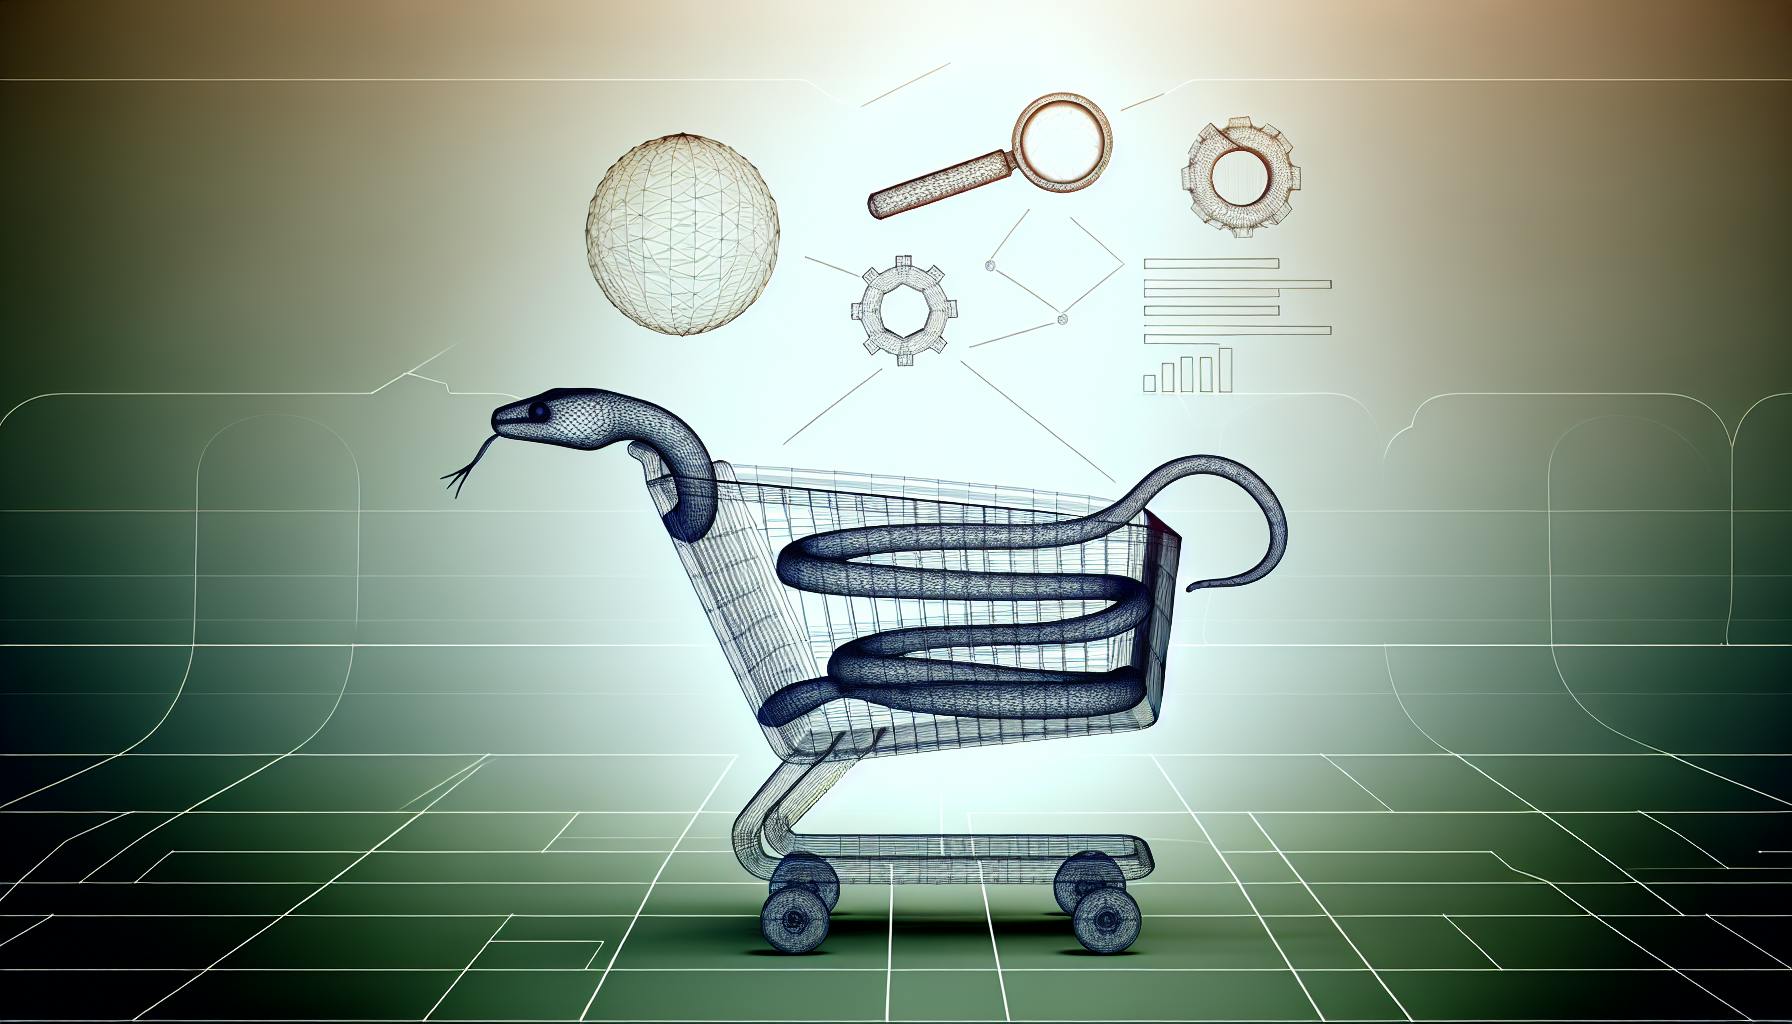 How to implement an SEO analyzer tool in Python for e-commerce sites